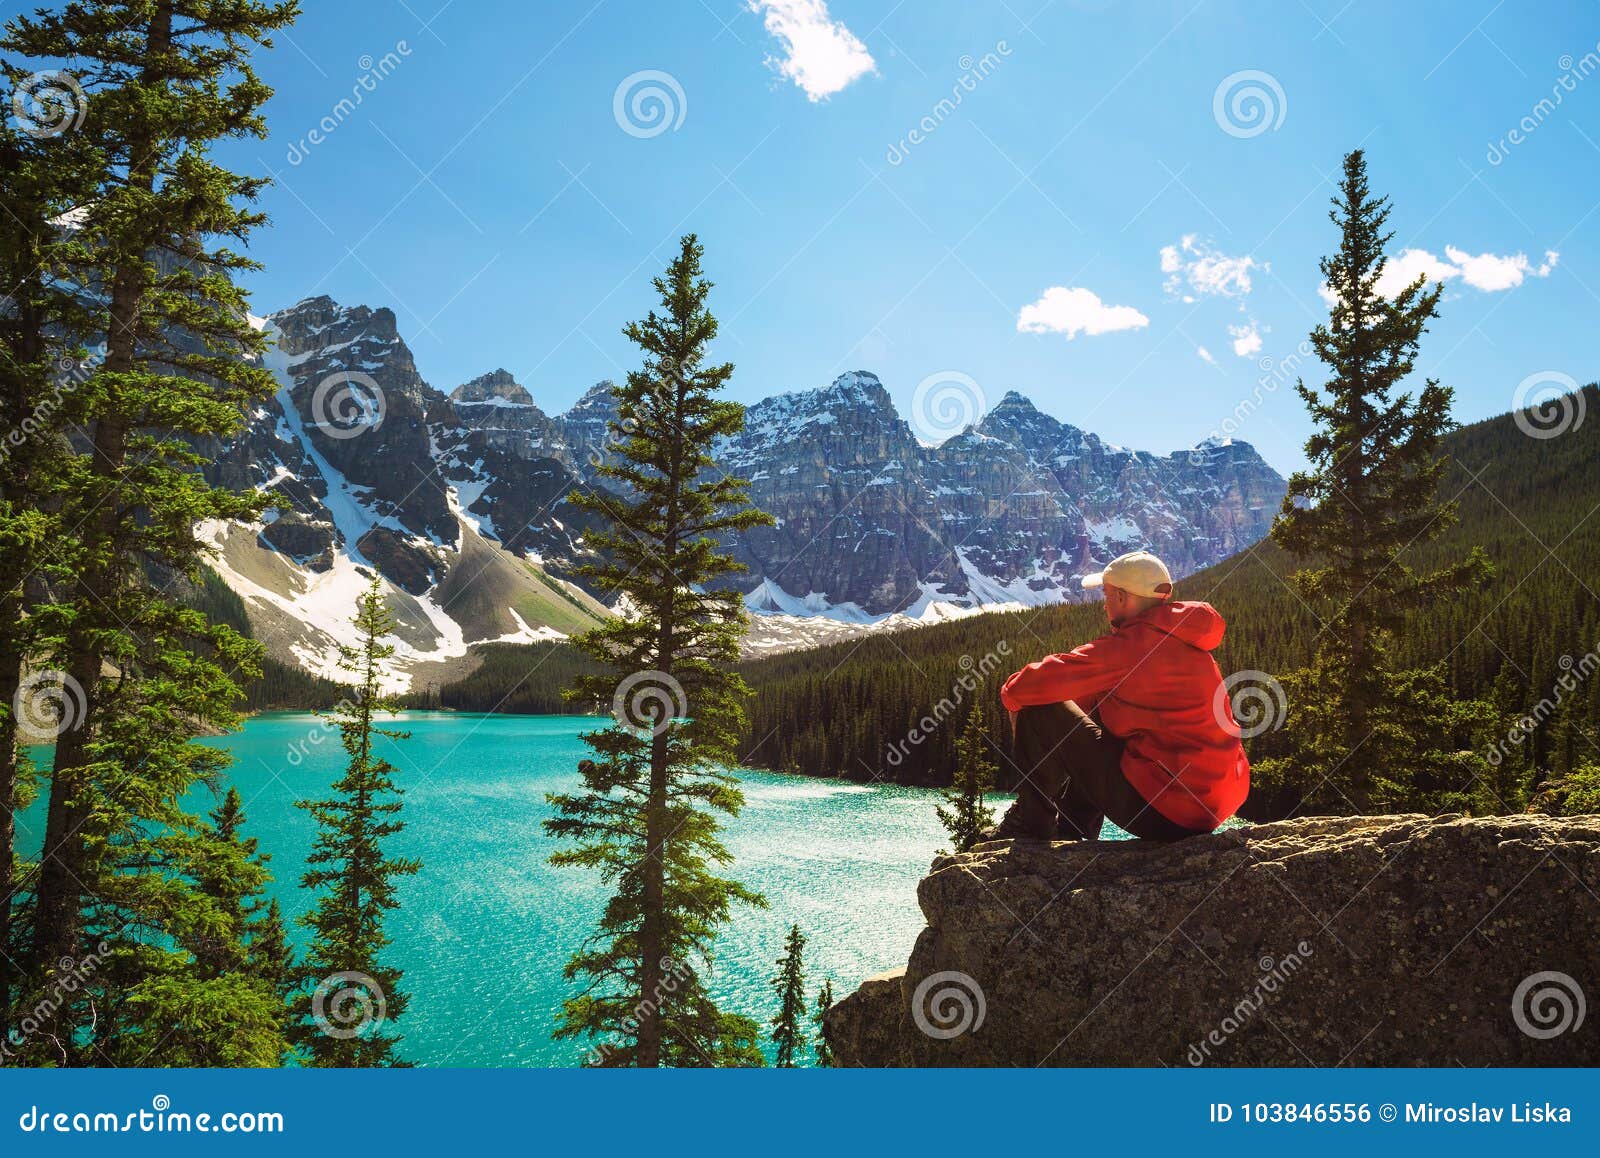 hiker enjoying the view of moraine lake in banff national park